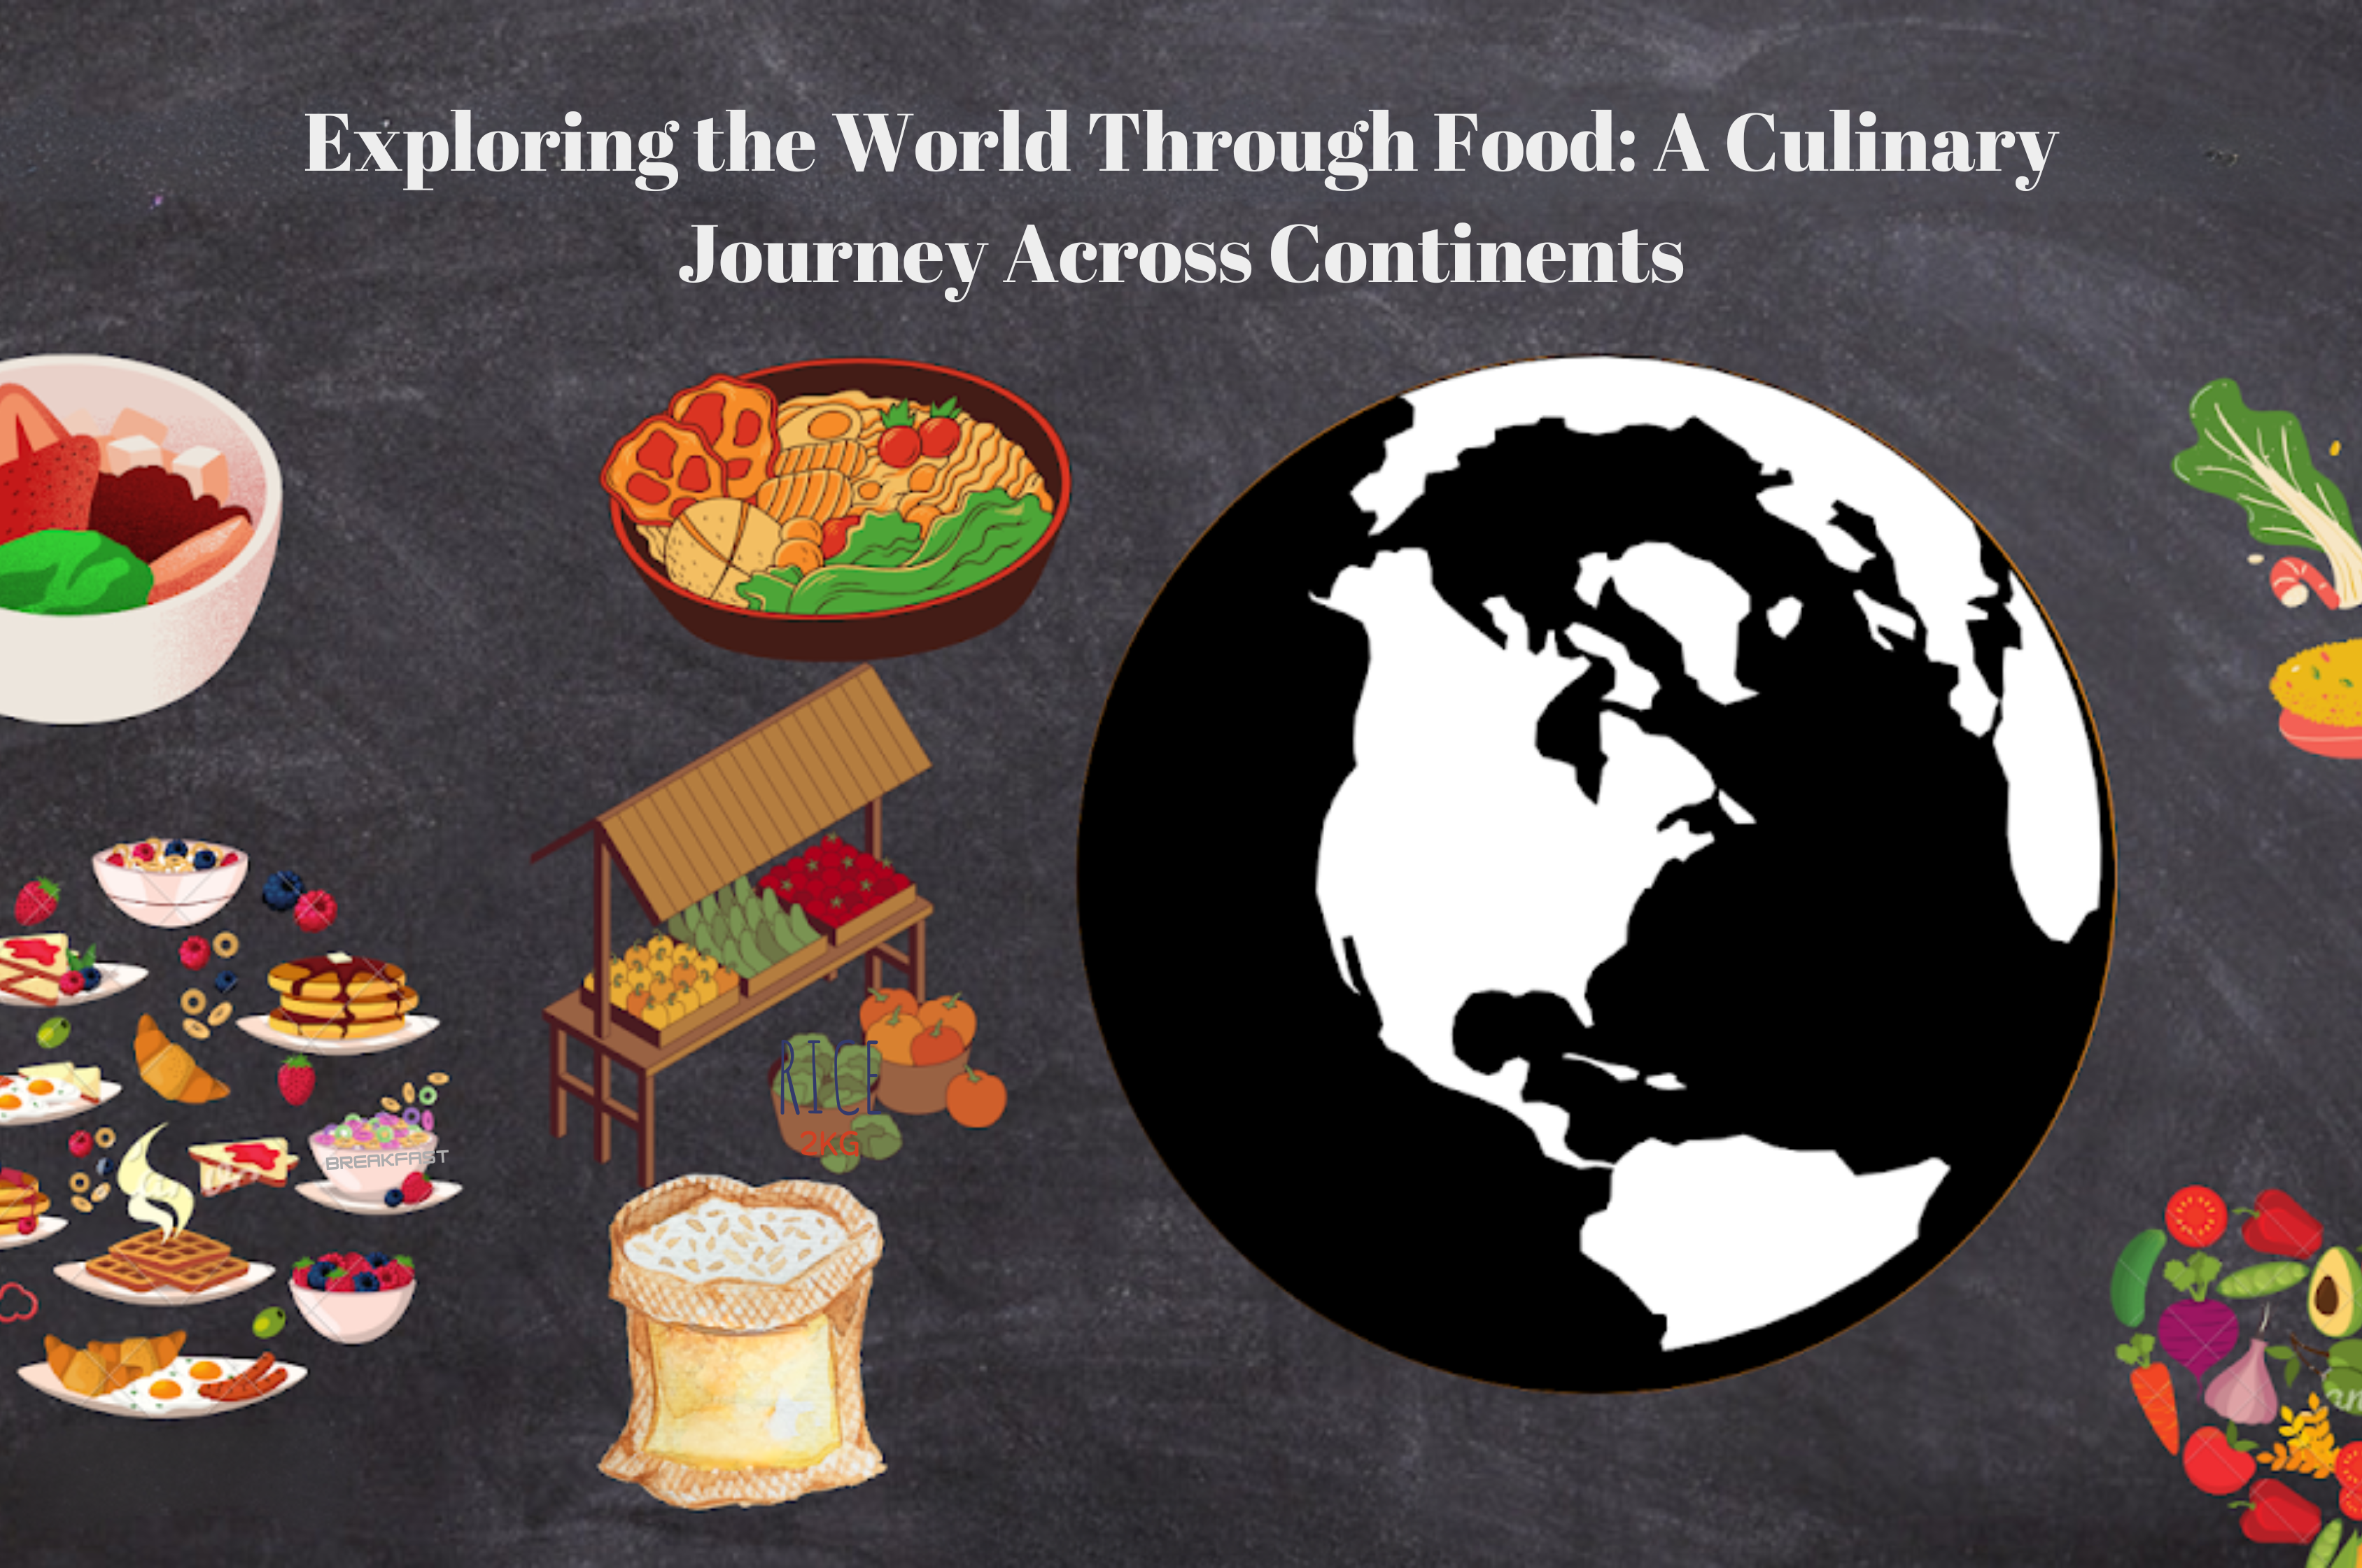 Cuisine and Culture: Exploring Your Host Country Through Food